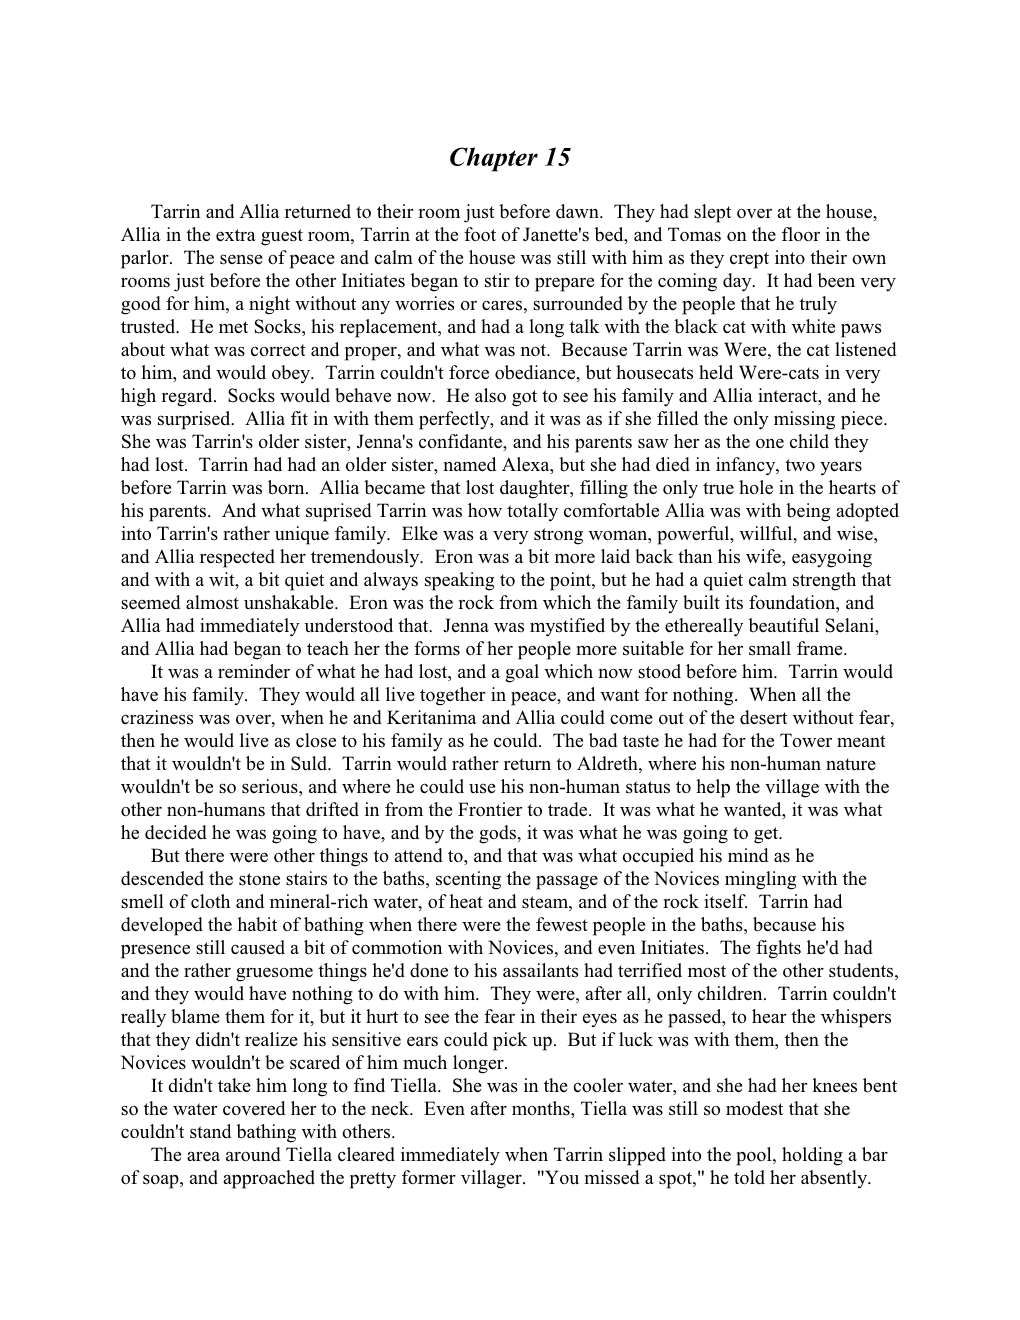 Tower of Sorcery - Chapter 15